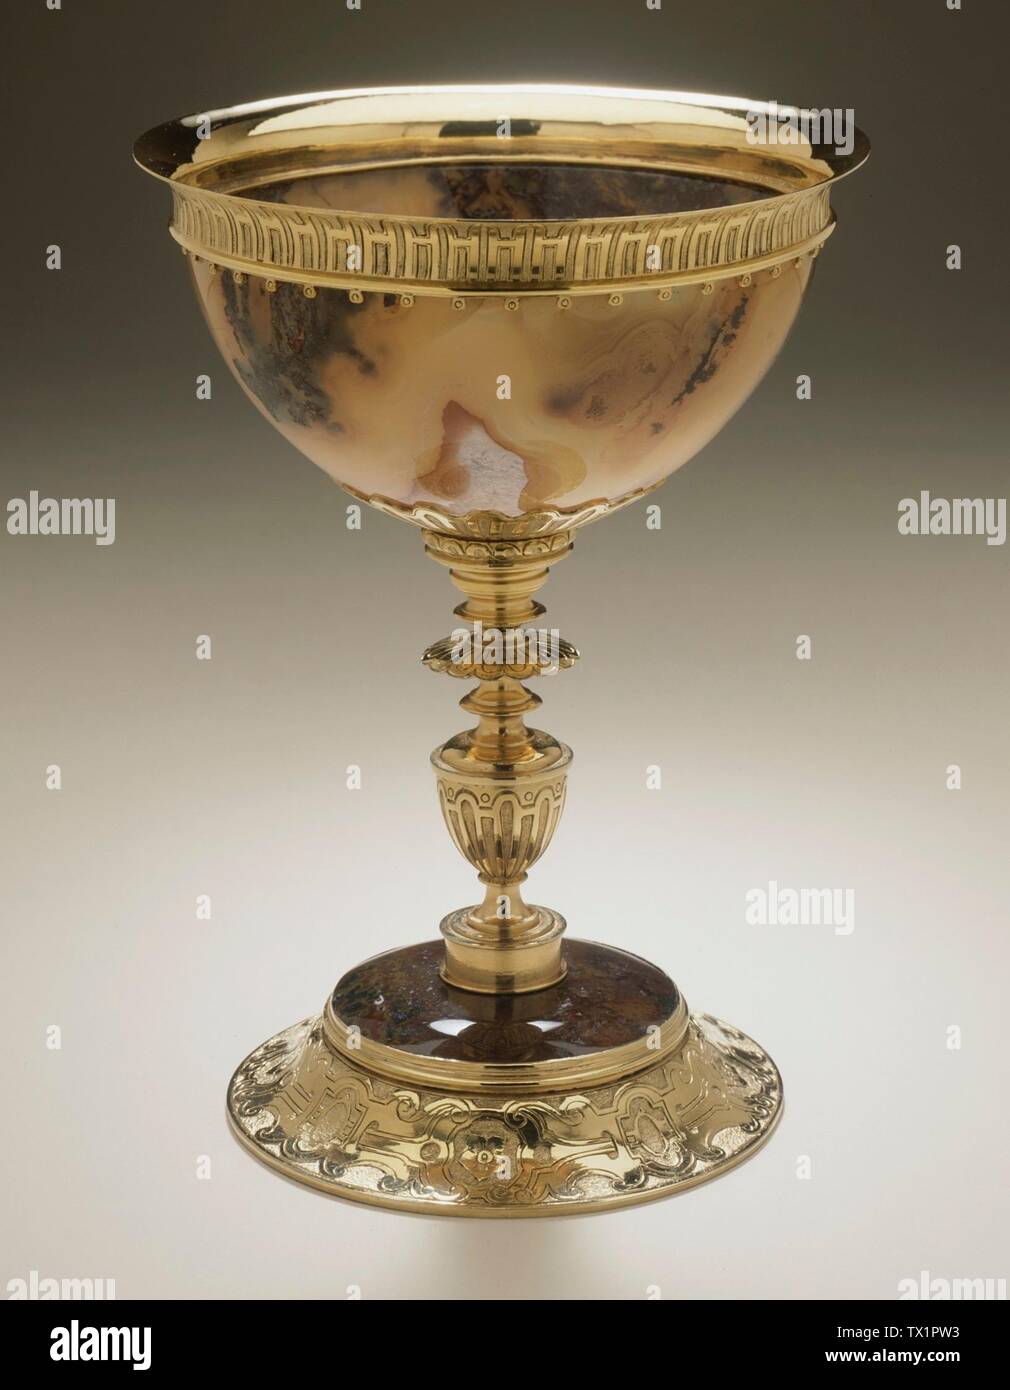 Cup; England, London, circa 1820 Furnishings; Serviceware Silver-gilt and agate Height:  5 5/8 in. (14.28 cm) Decorative Arts Council Fund (AC1999.1.1) Decorative Arts and Design; circa 1820 date QS:P571,+1820-00-00T00:00:00Z/9,P1480,Q5727902; Stock Photo